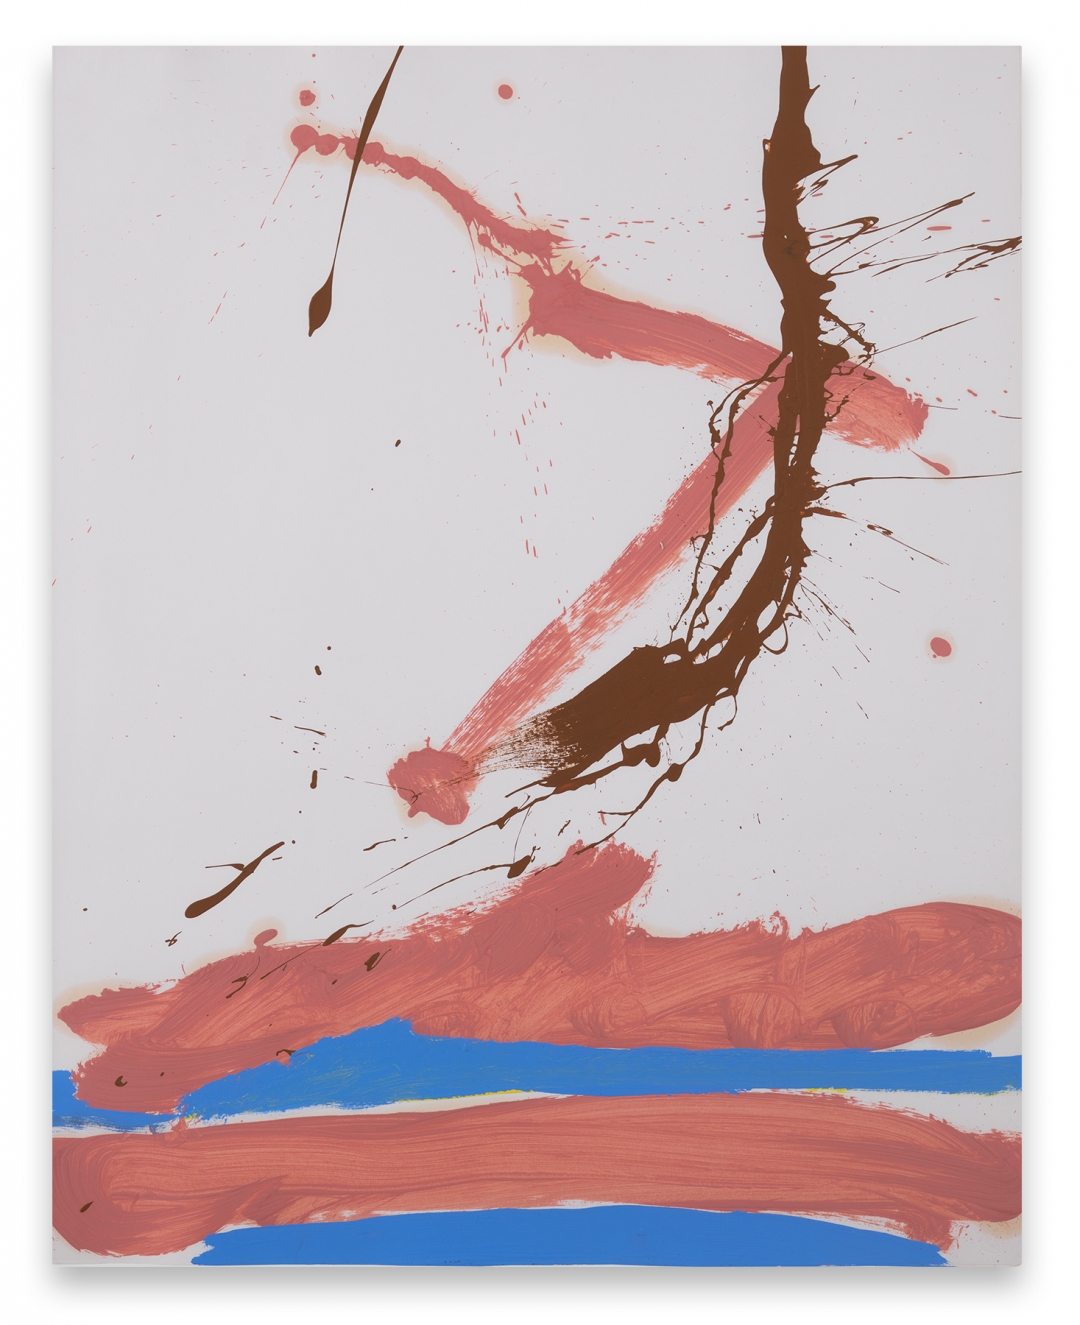 Robert Motherwell, <i>Beside the Sea No. 41</i>, 1966, oil and acrylic on paper, 29 x 22 7/8 in (73.7 x 58.1 cm)